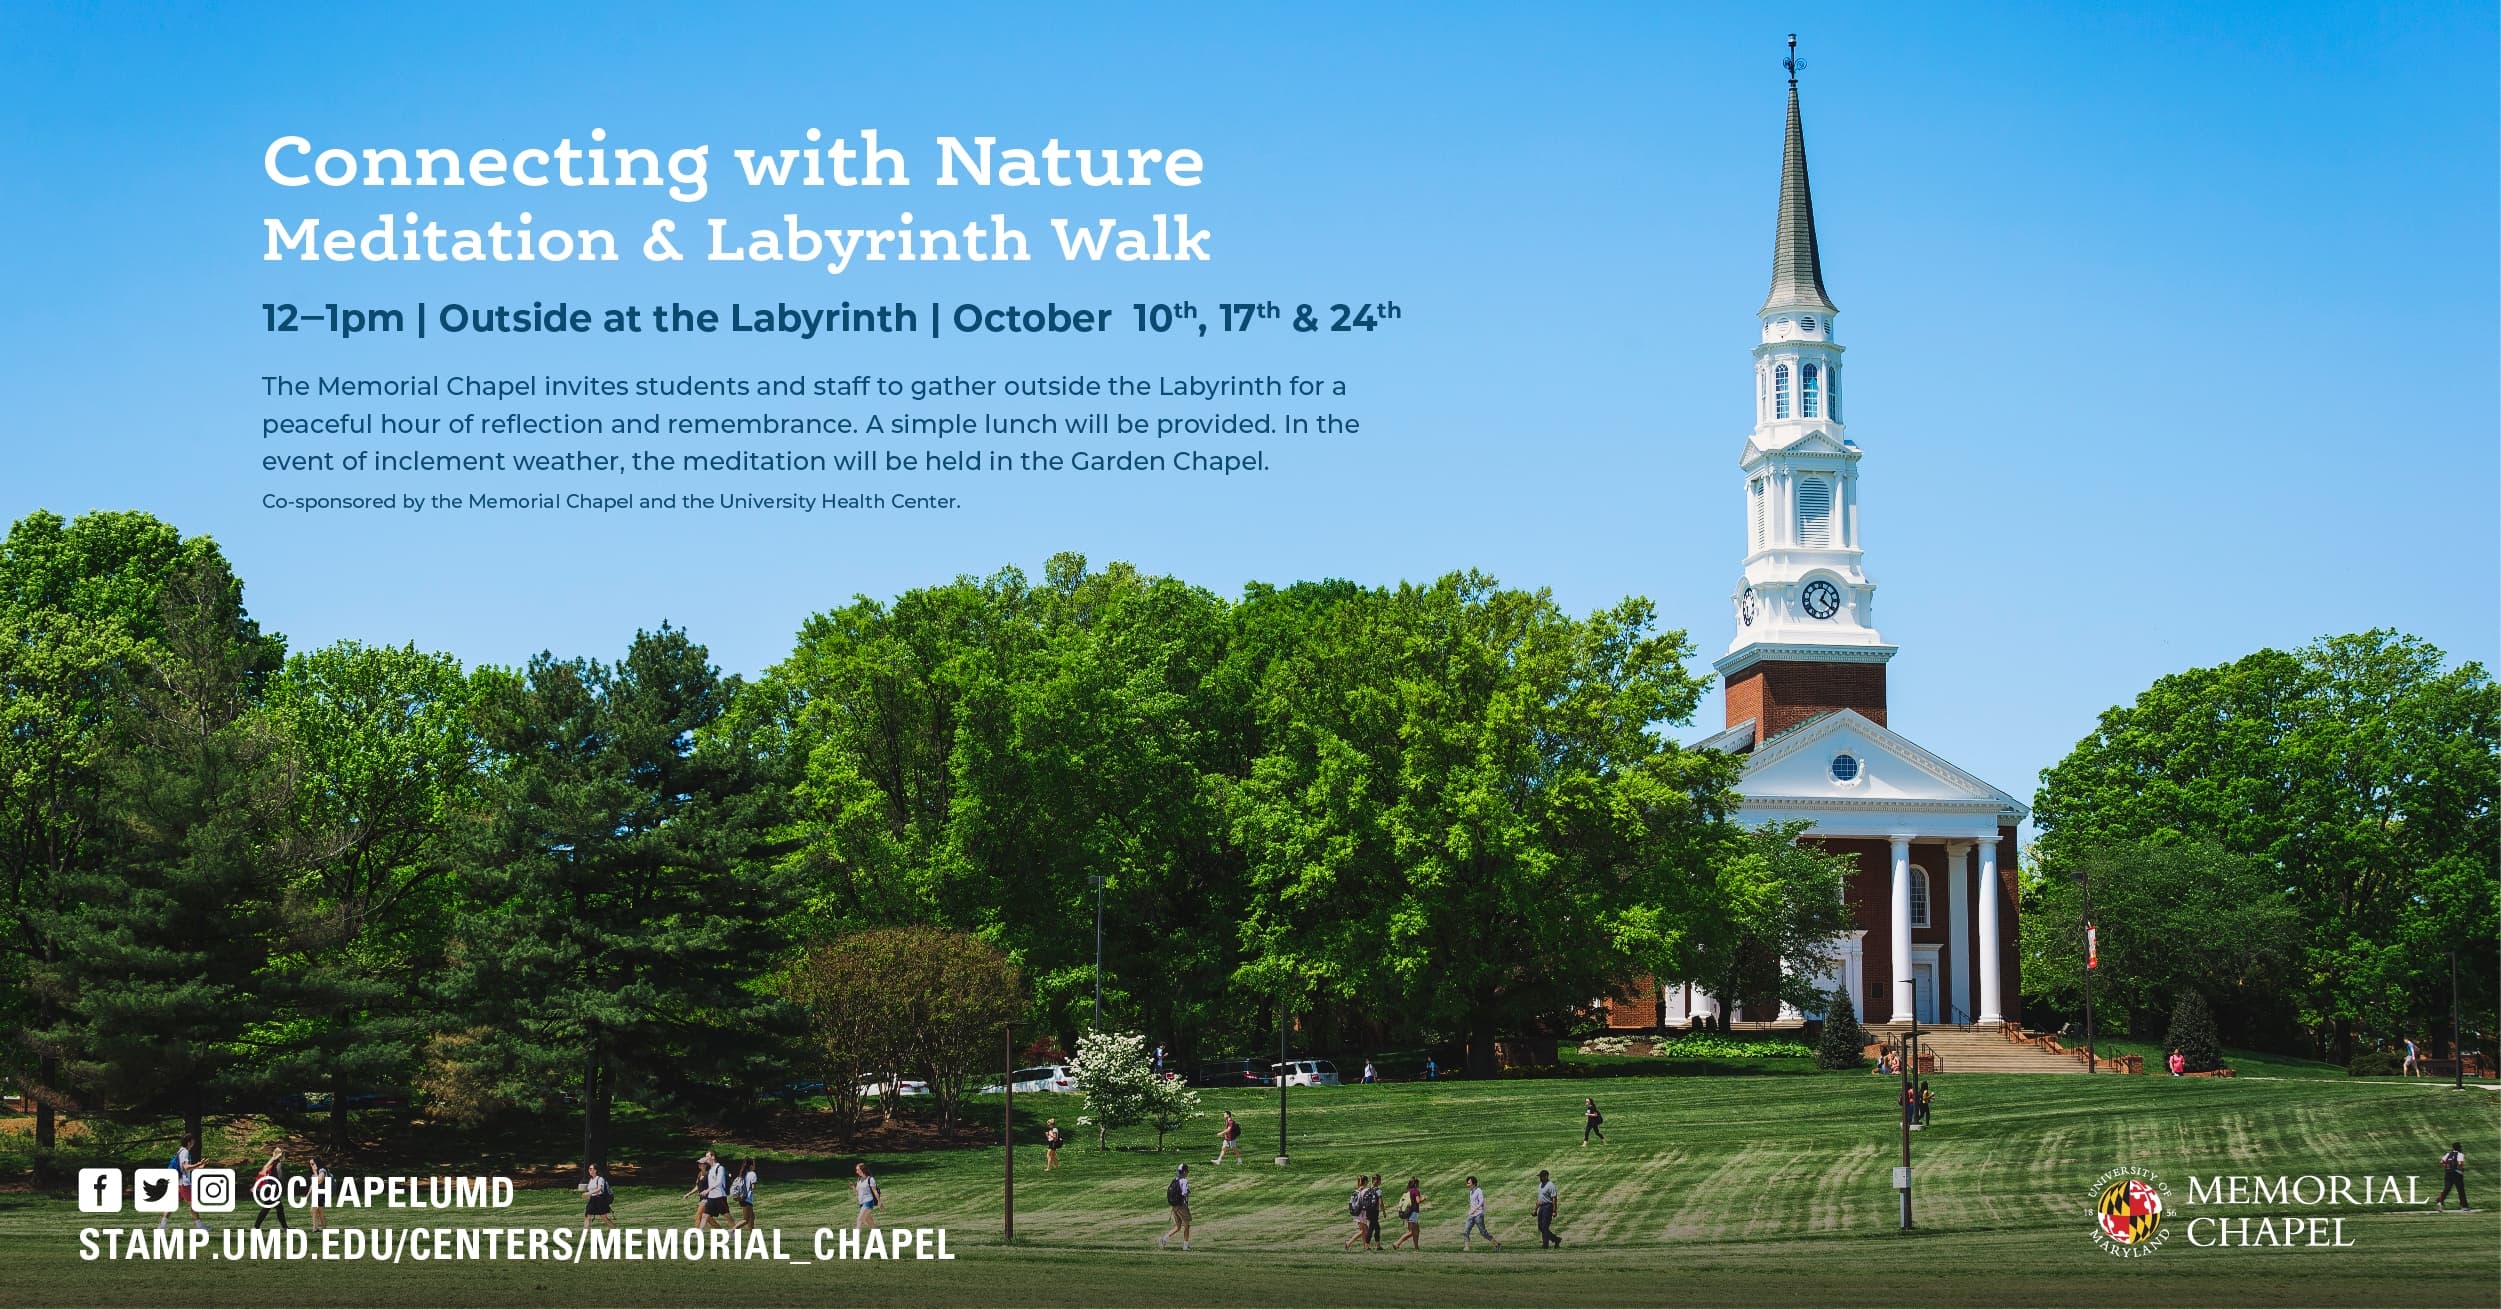 Photograph of memorial chapel and lush green trees, with event details at the image text.